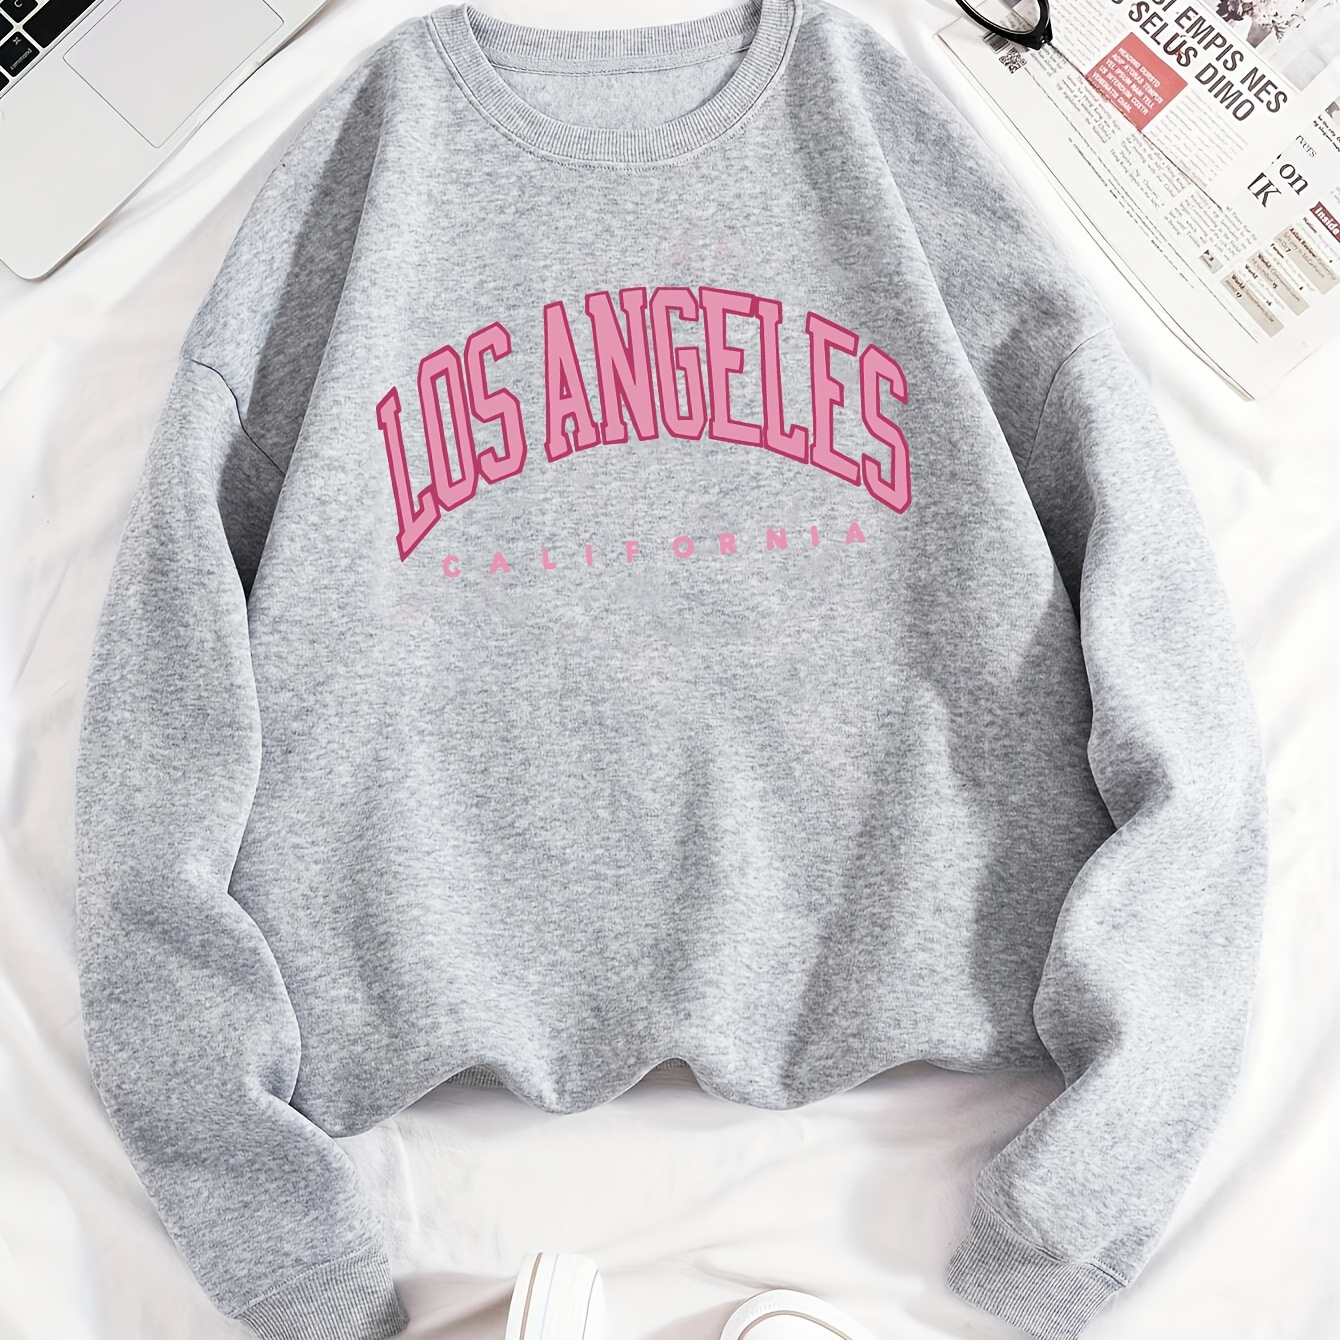 

Los Angeles California Print, Women's Long Sleeve Pullover Sweatshirt, Casual American Style, Warm Letter Graphic Print, Sportswear For Spring/fall/winter